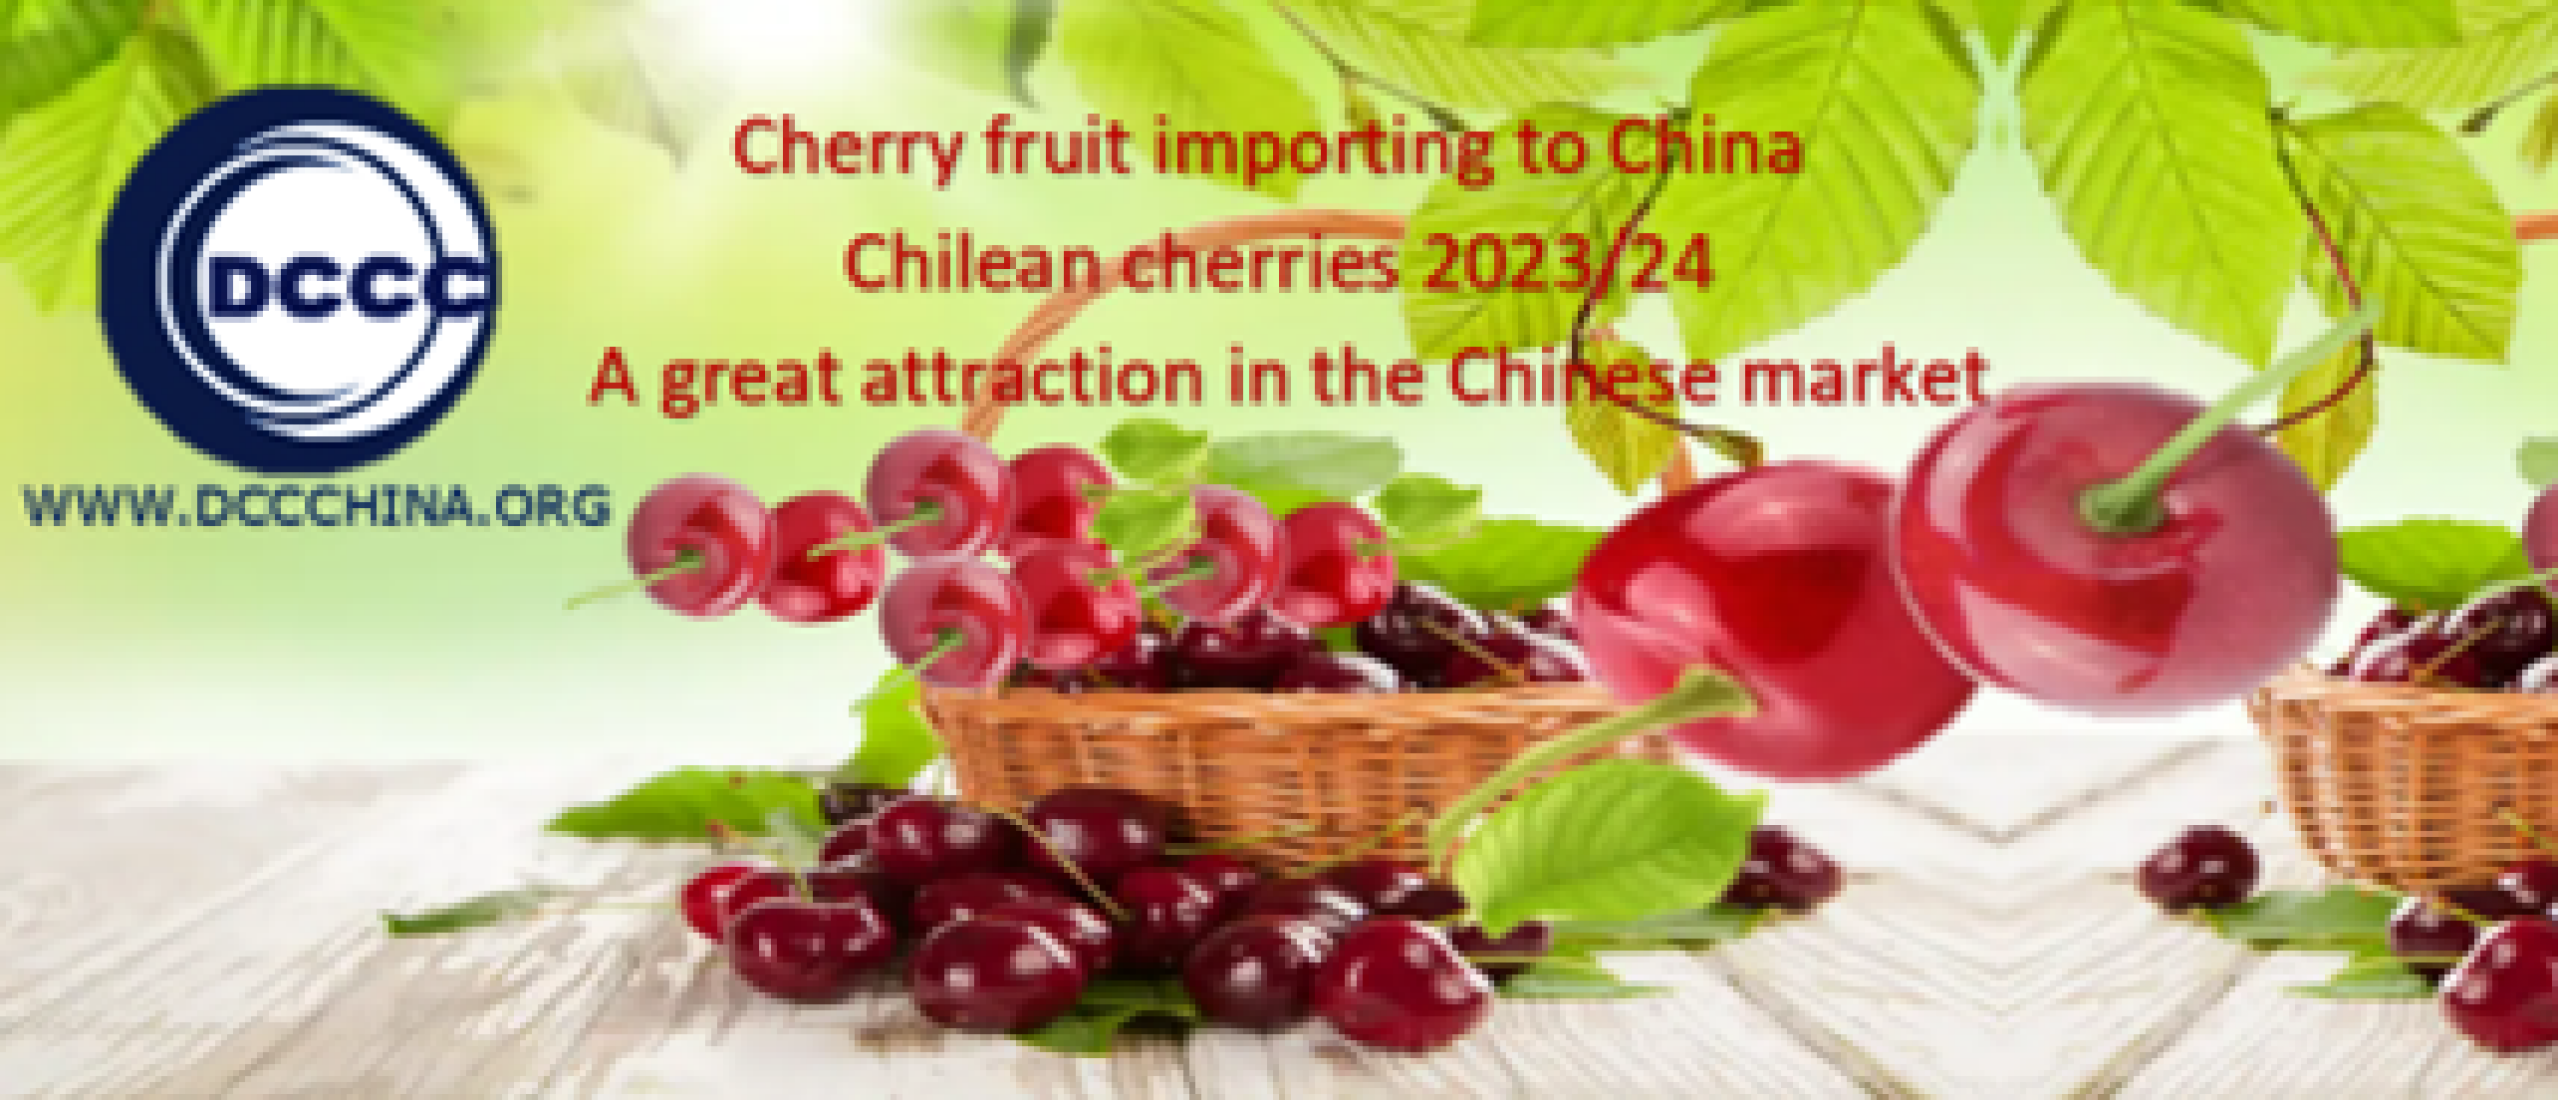 Chilean cherries 2023/24 imported to China arrived in Shanghai